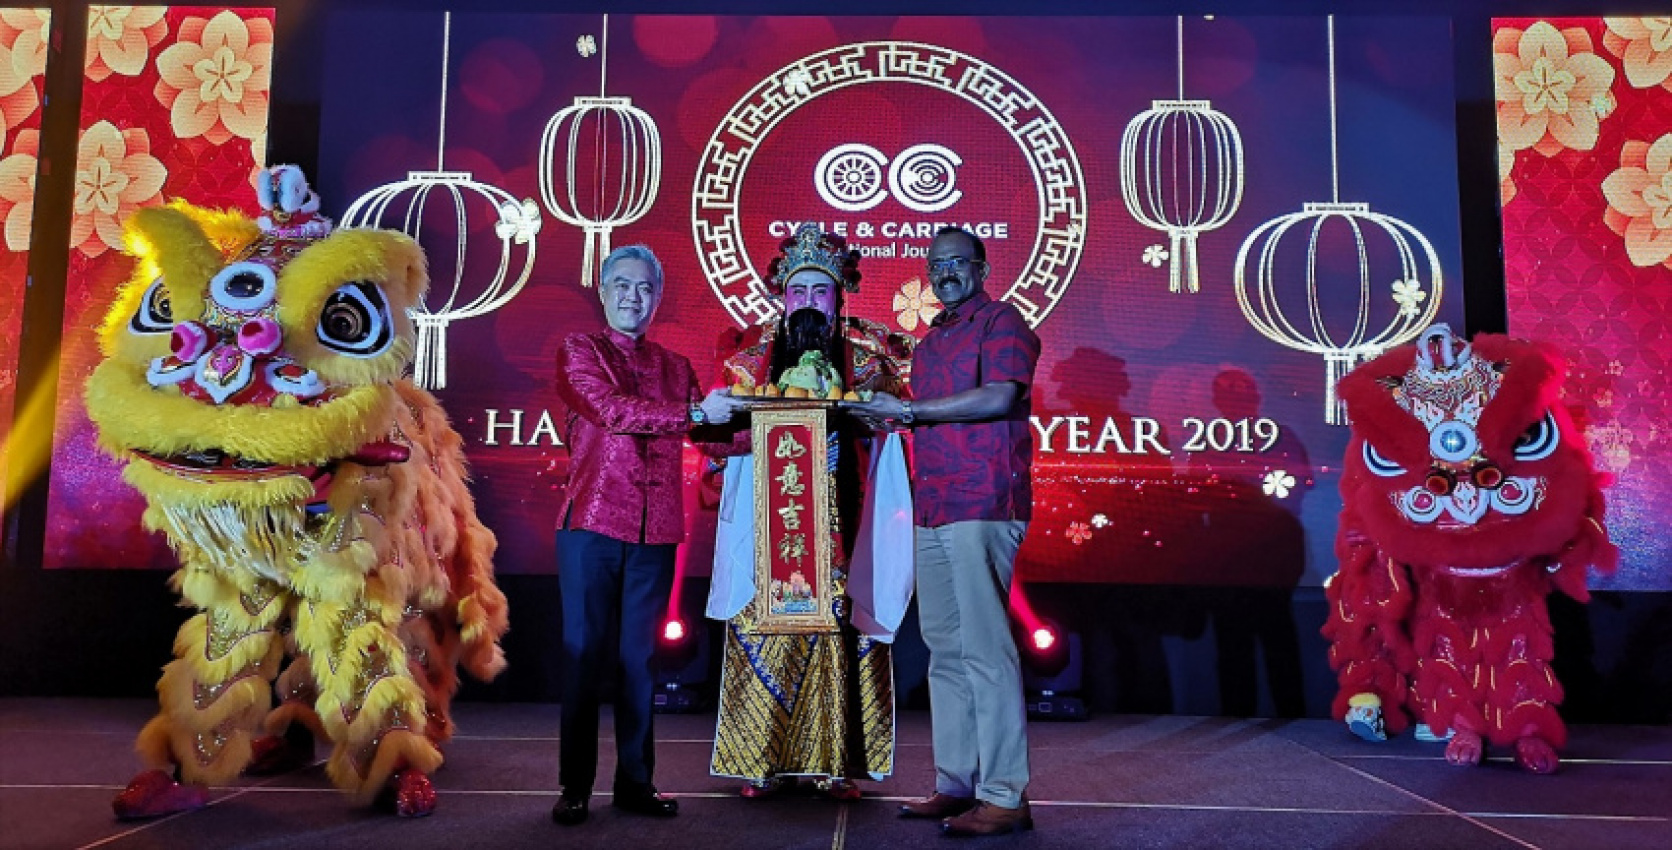 autos, car brands, cars, mercedes-benz, automotive, chinese new year, cycle & carriage bintang, dealership, lunar new year, malaysia, mercedes, cycle & carriage bintang celebrates lunar new year and 120th anniversary with its mercedes-benz customers